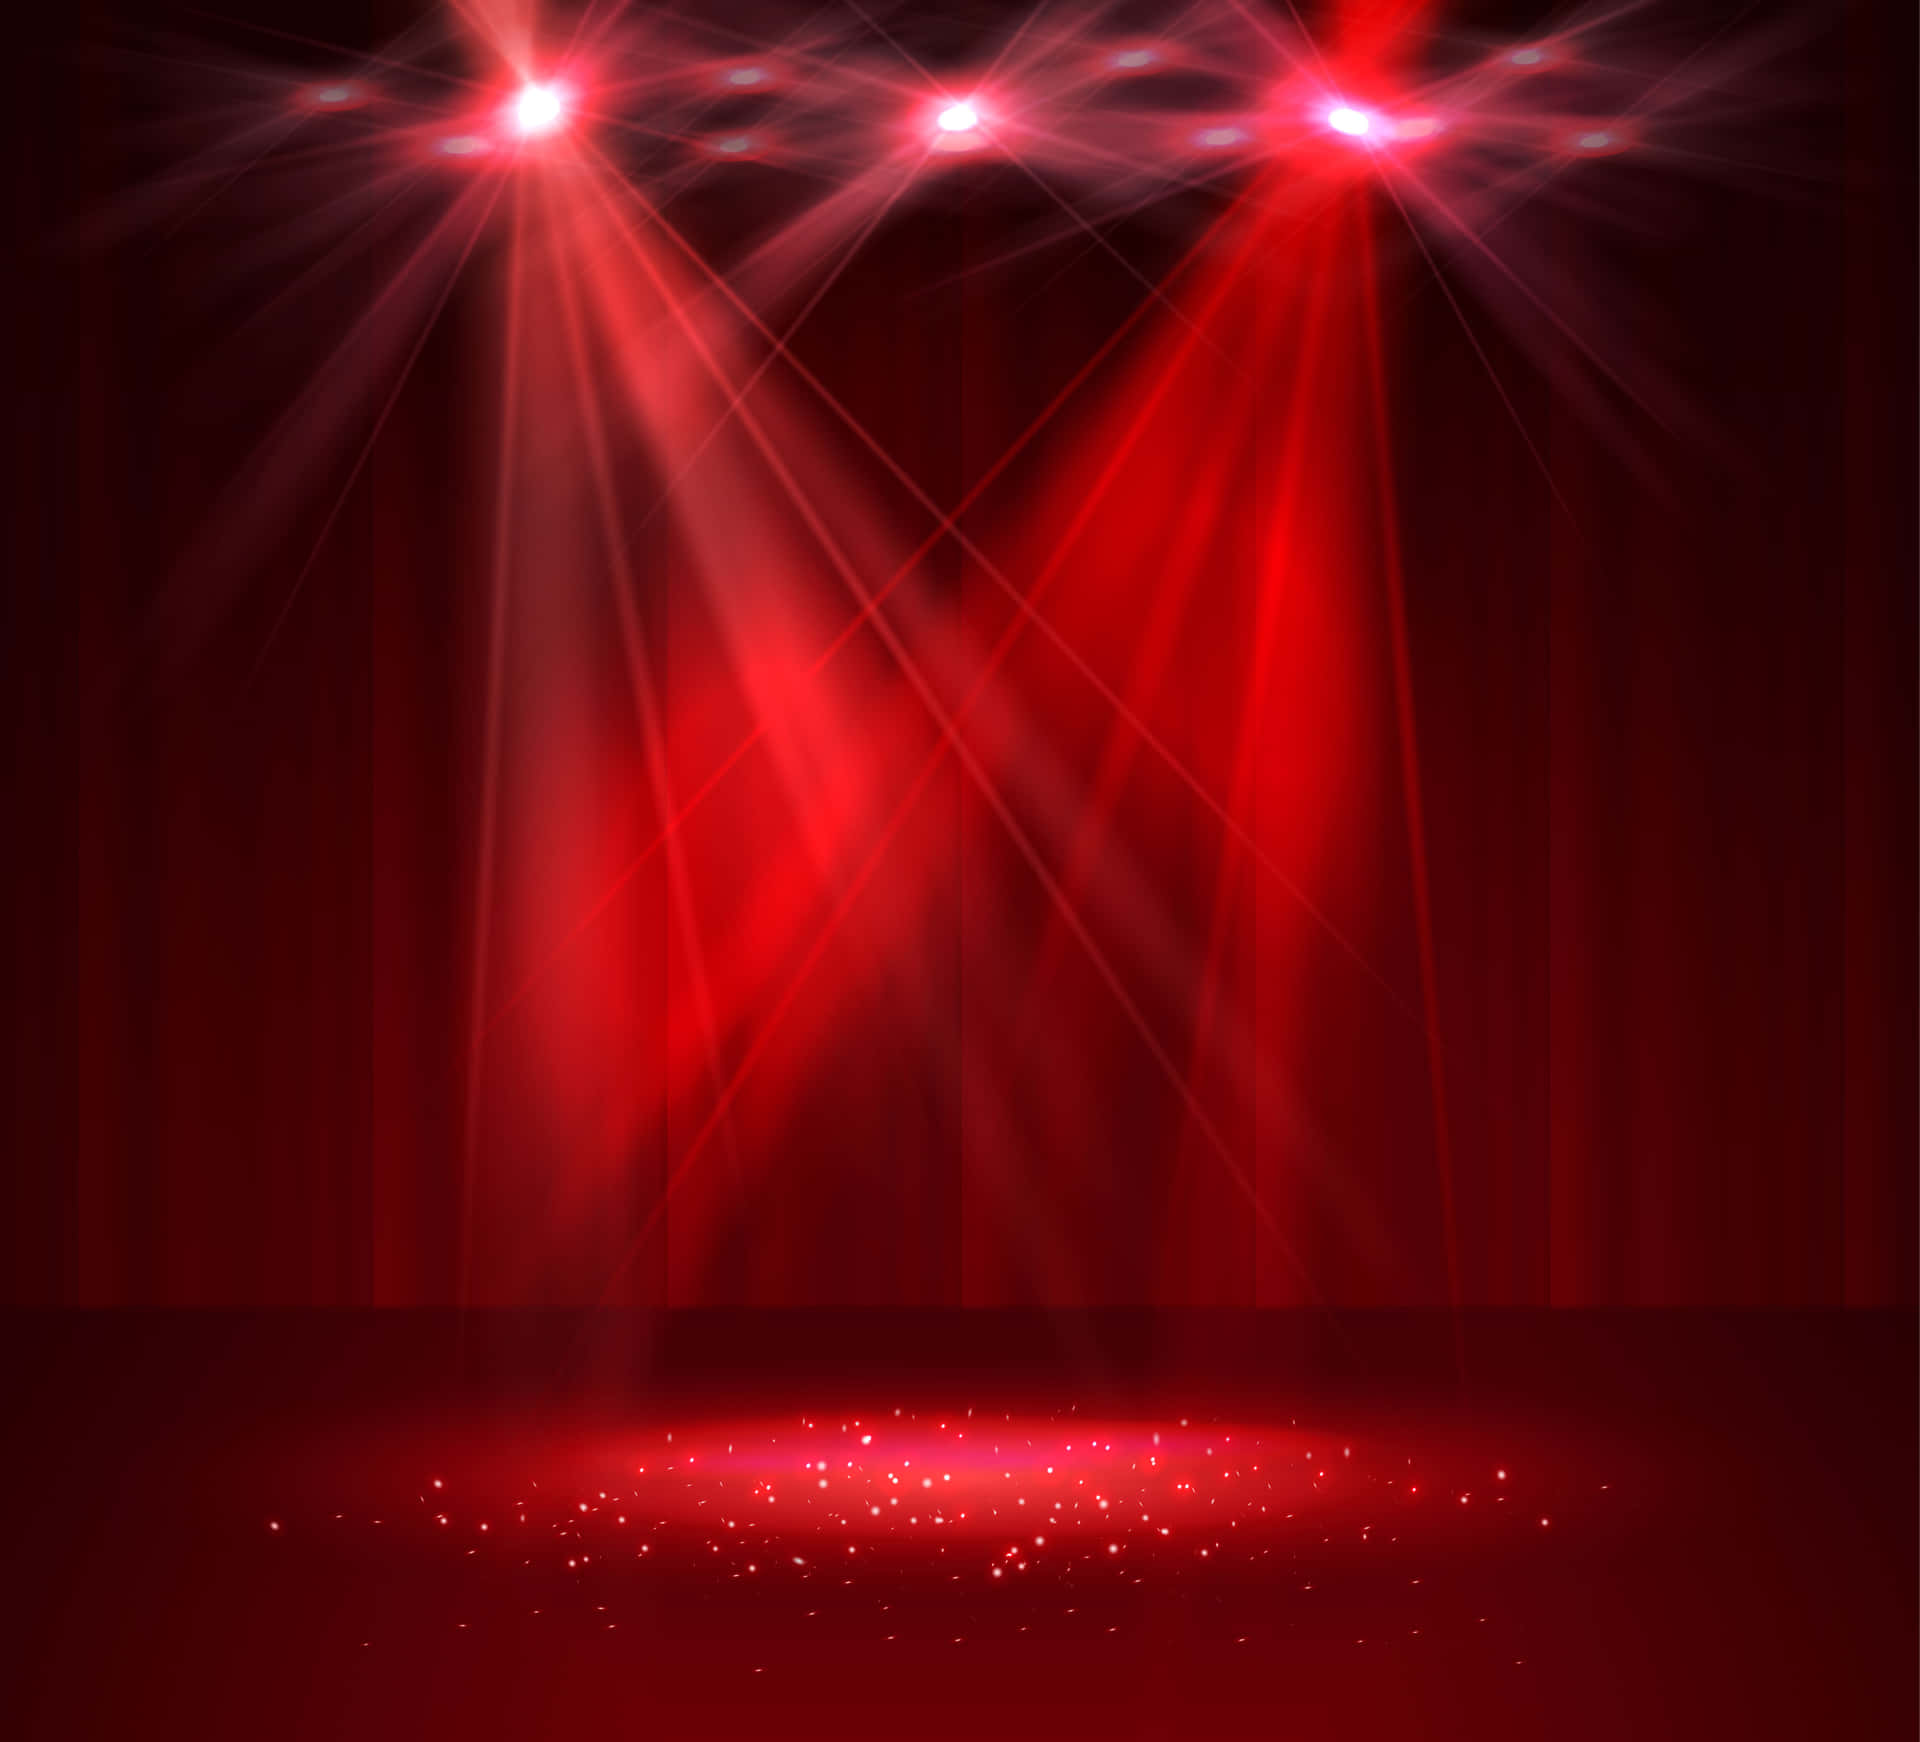 Stage With Red Spotlights On A Dark Background